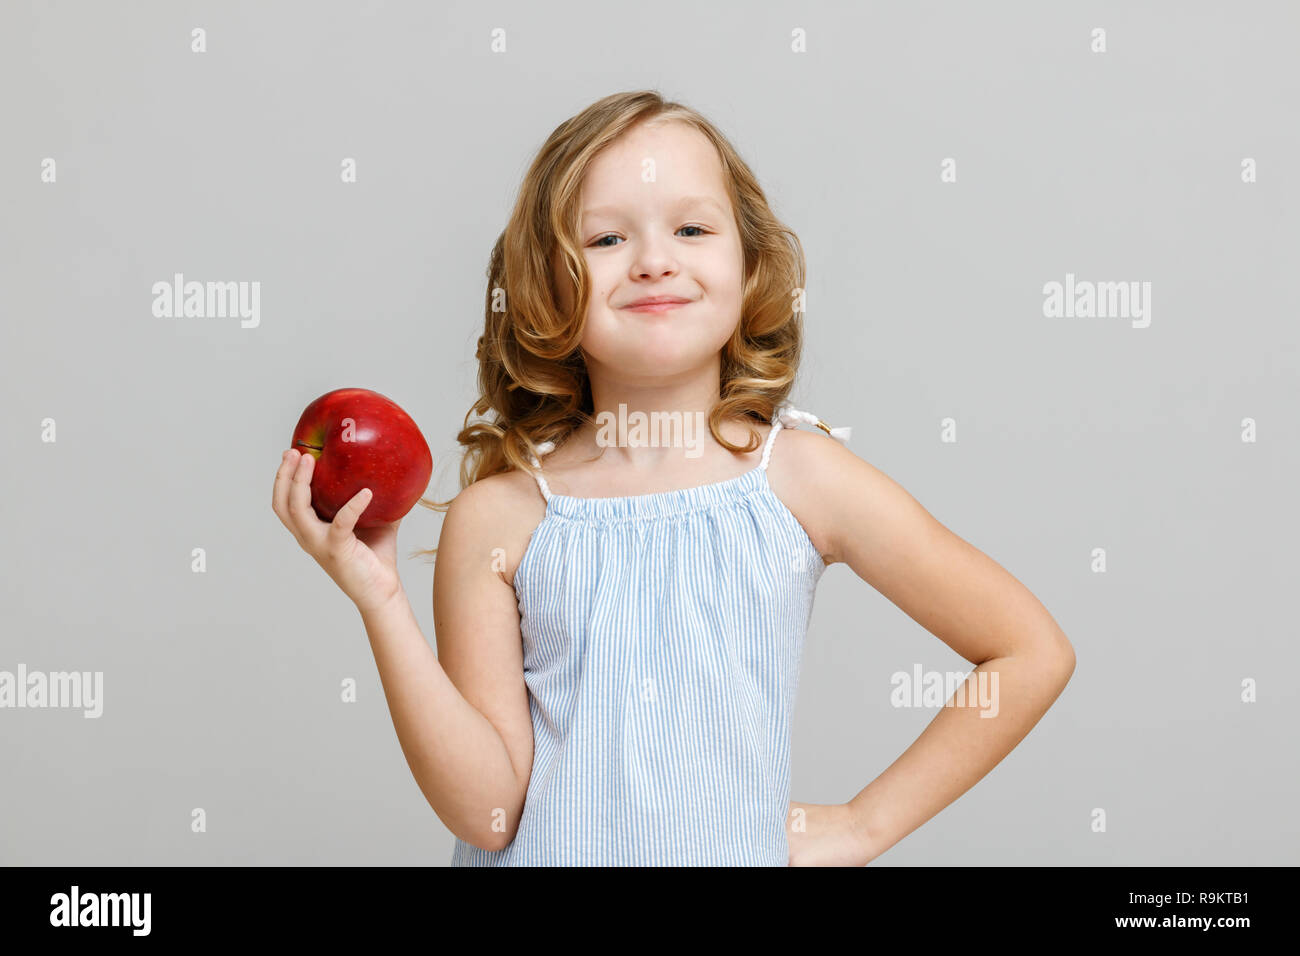 Portrait of a happy smiling little blonde girl on a gray background. Baby eating red apple Stock Photo